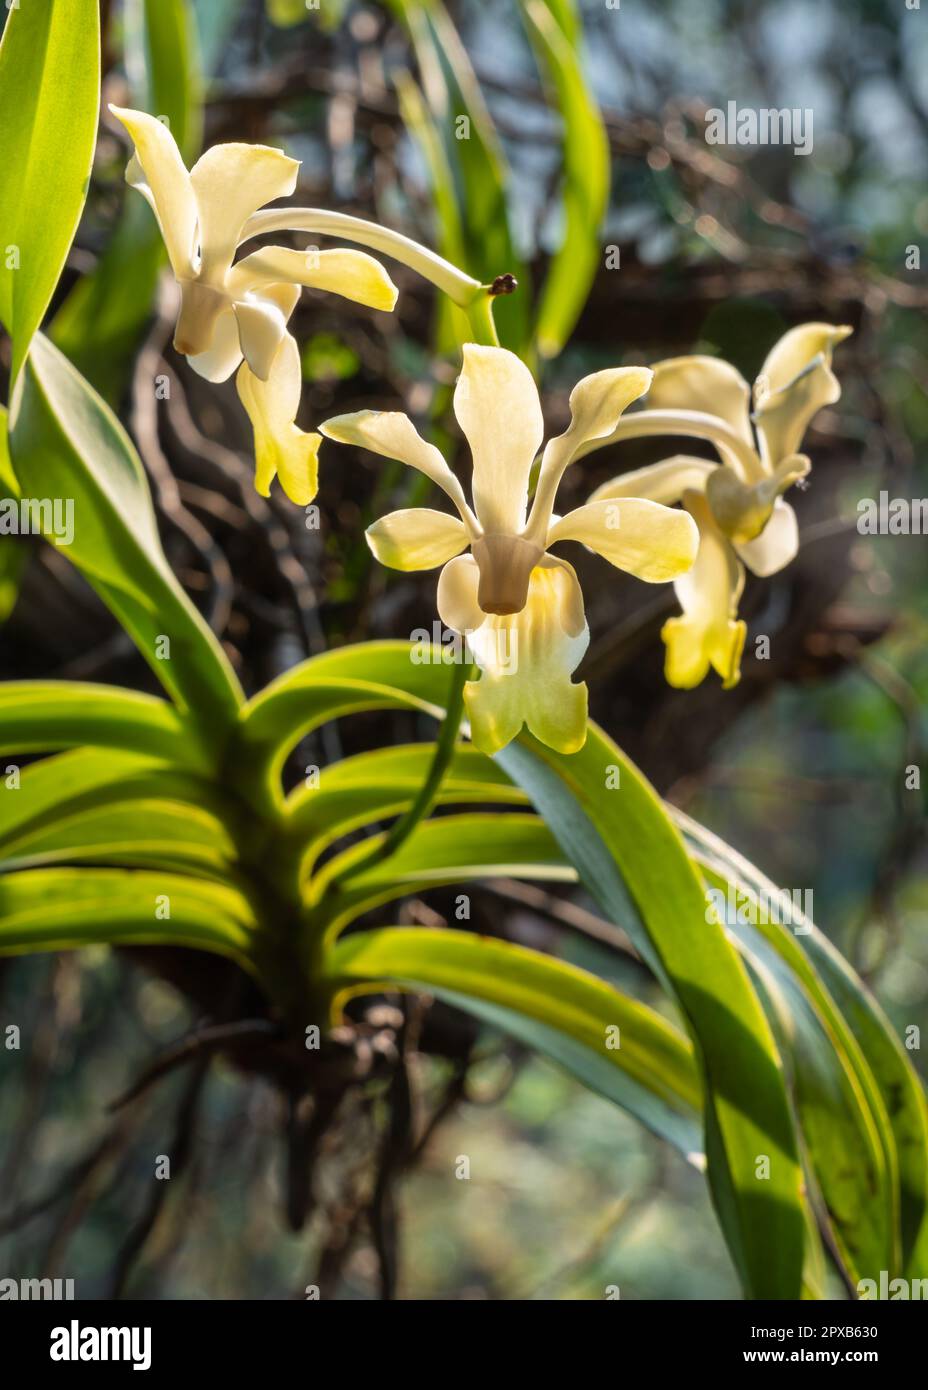 Closeup view of backlit yellow and white flowers of vanda denisoniana epiphytic orchid species blooming outdoors on natural background Stock Photo